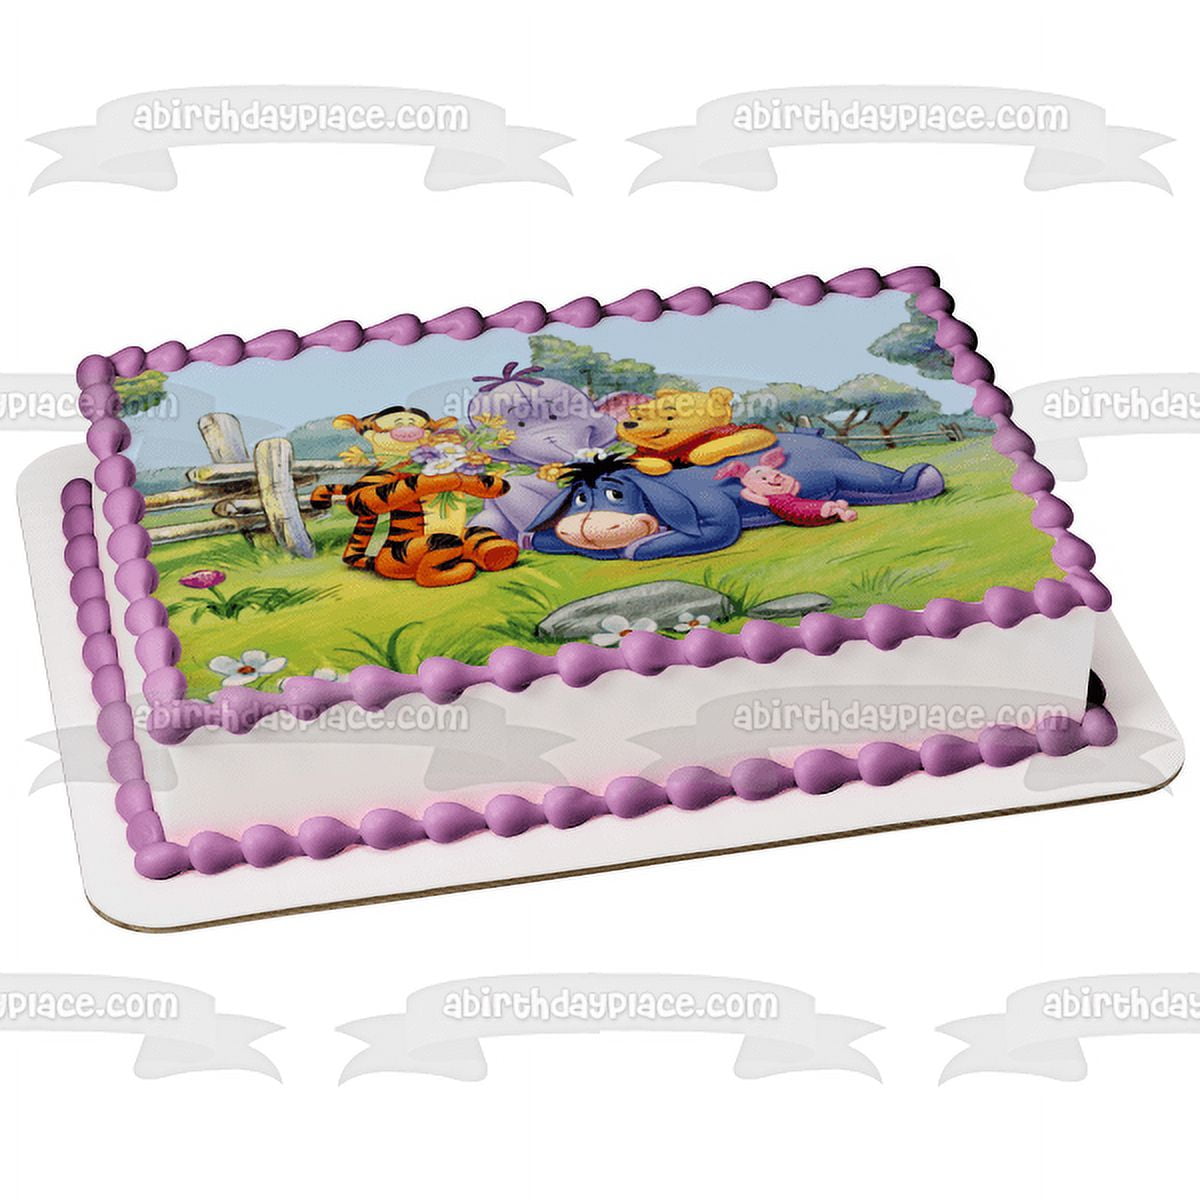 Best Selling Winnie The Pooh Cakes Toppers for 2023 - The